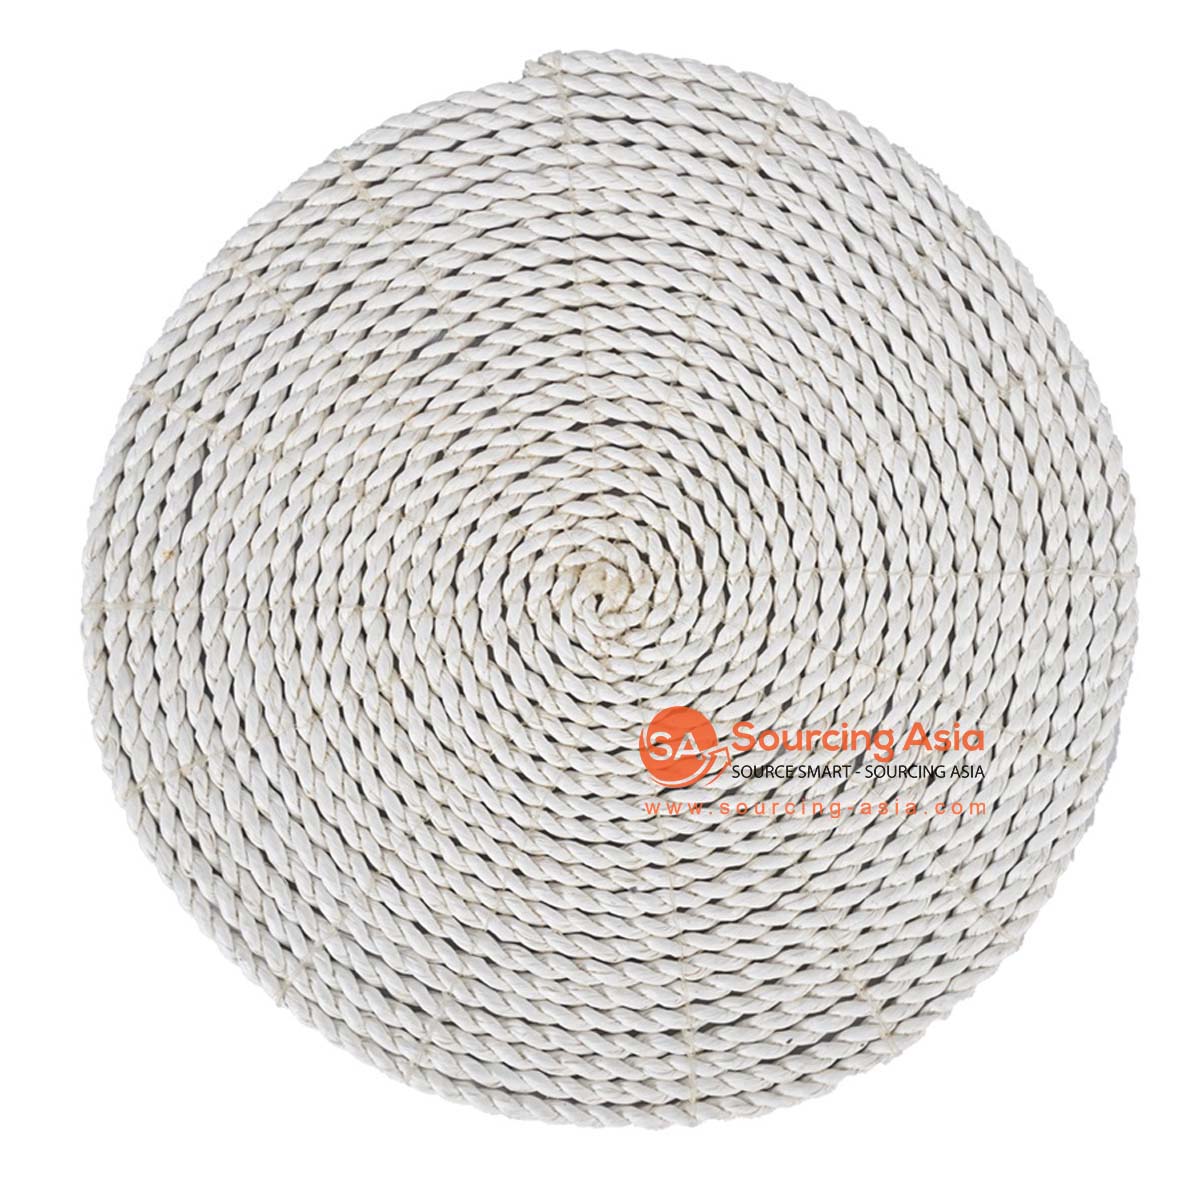 HBSC568-3 WHITE SEAGRASS ROUND PLACEMAT